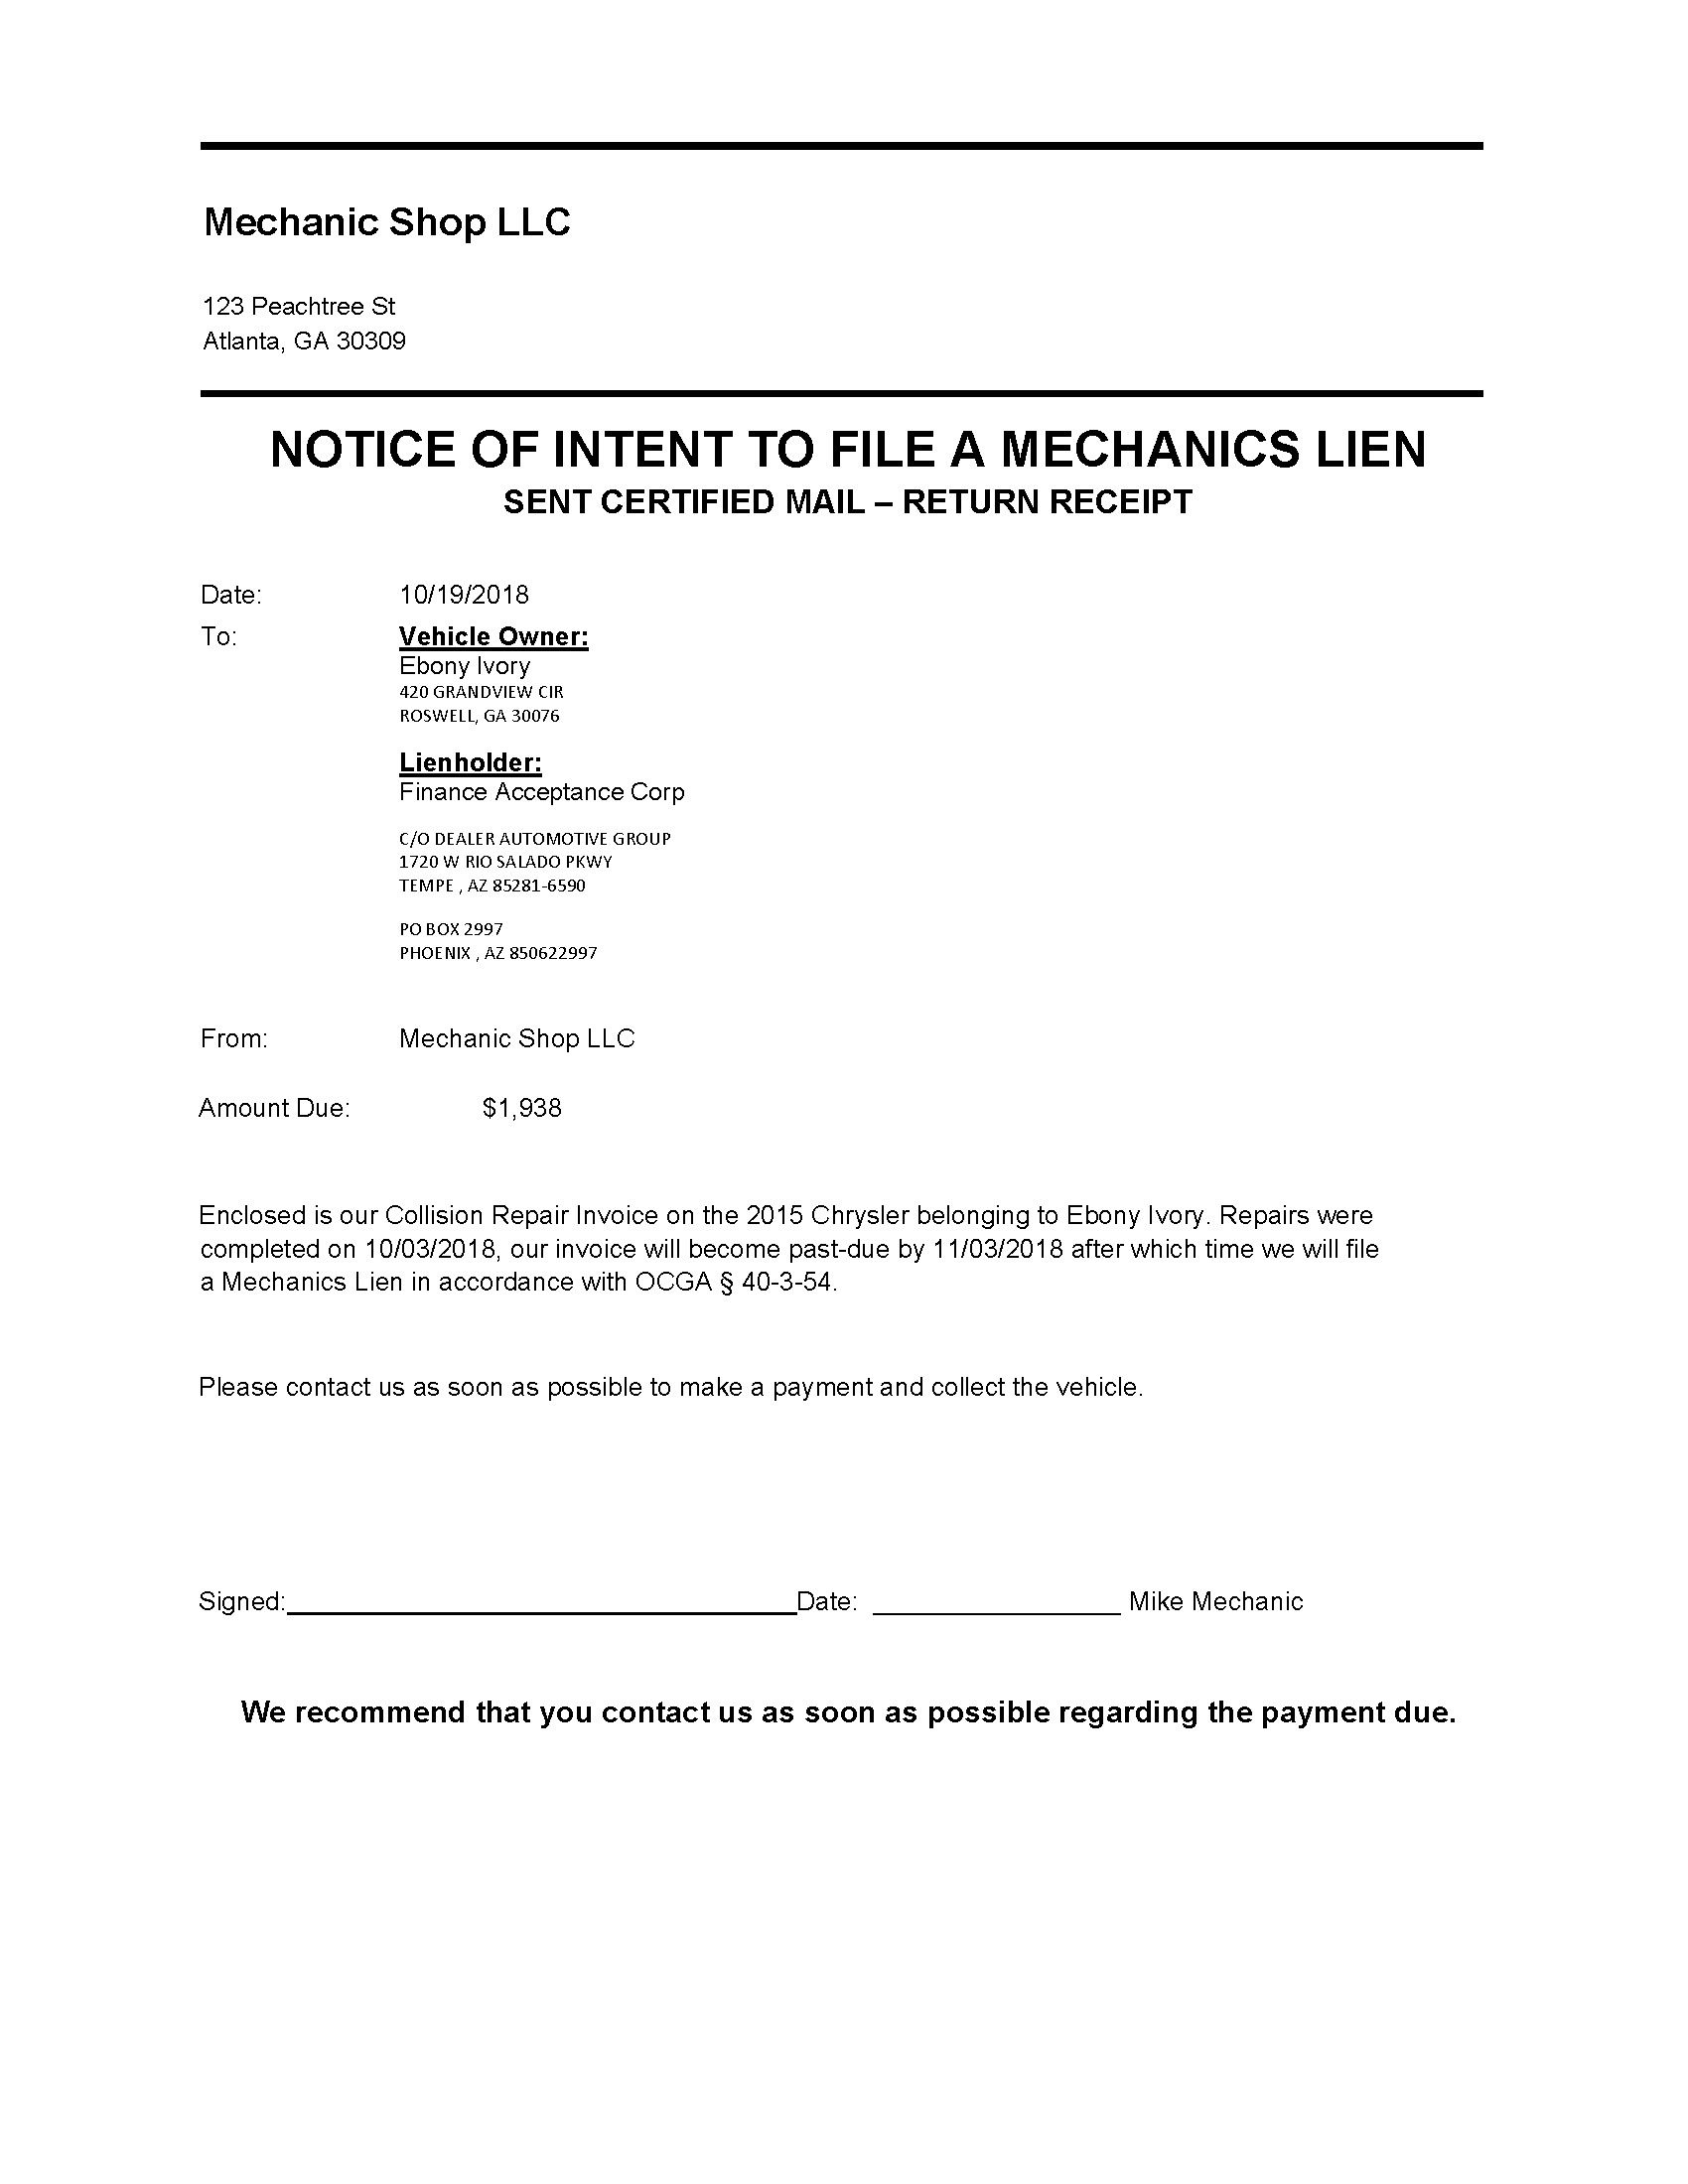 notice-of-intent-to-file-a-mechanics-lien-diminished-value-georgia